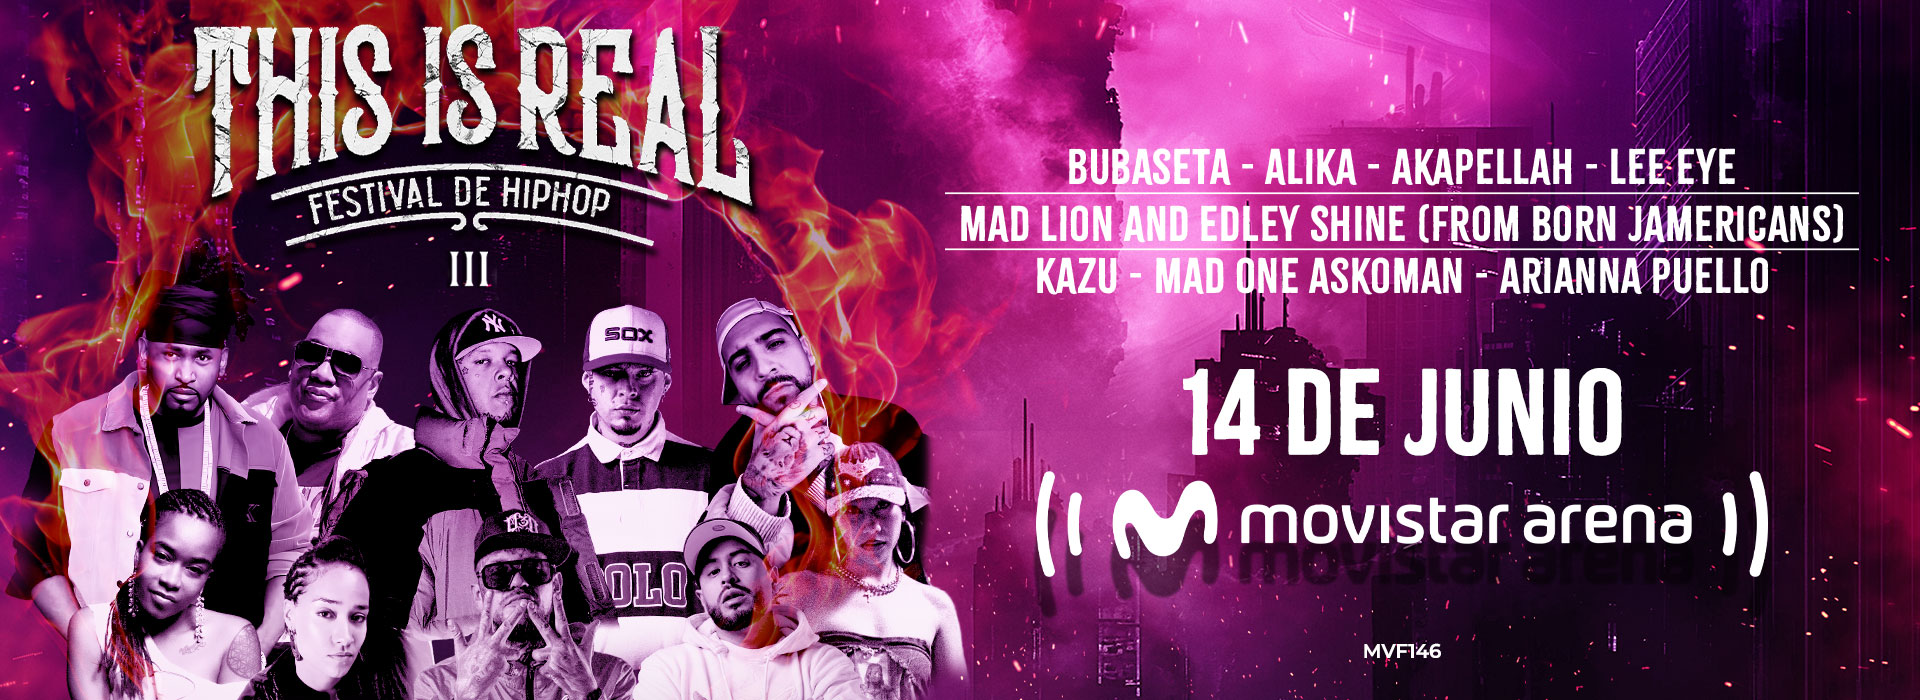 THIS IS REAL - FESTIVAL DE HIP HOP LATINO III